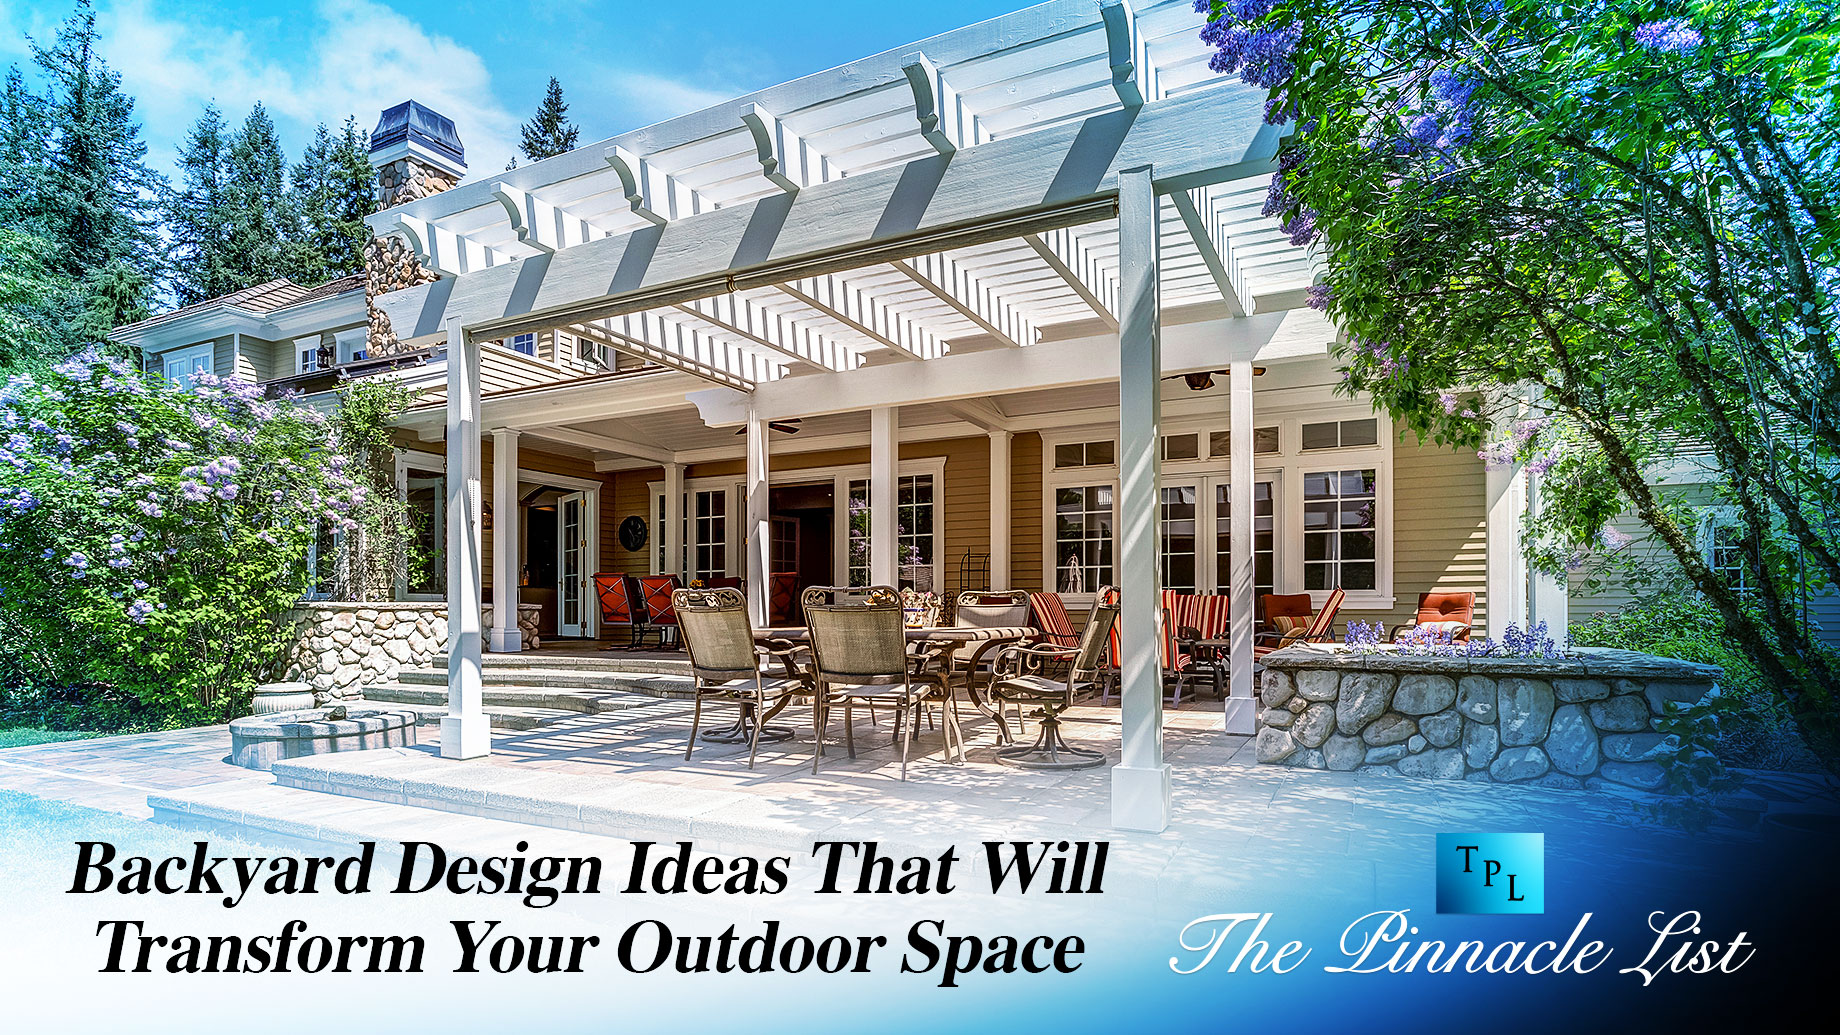 Backyard Design Ideas That Will Transform Your Outdoor Space